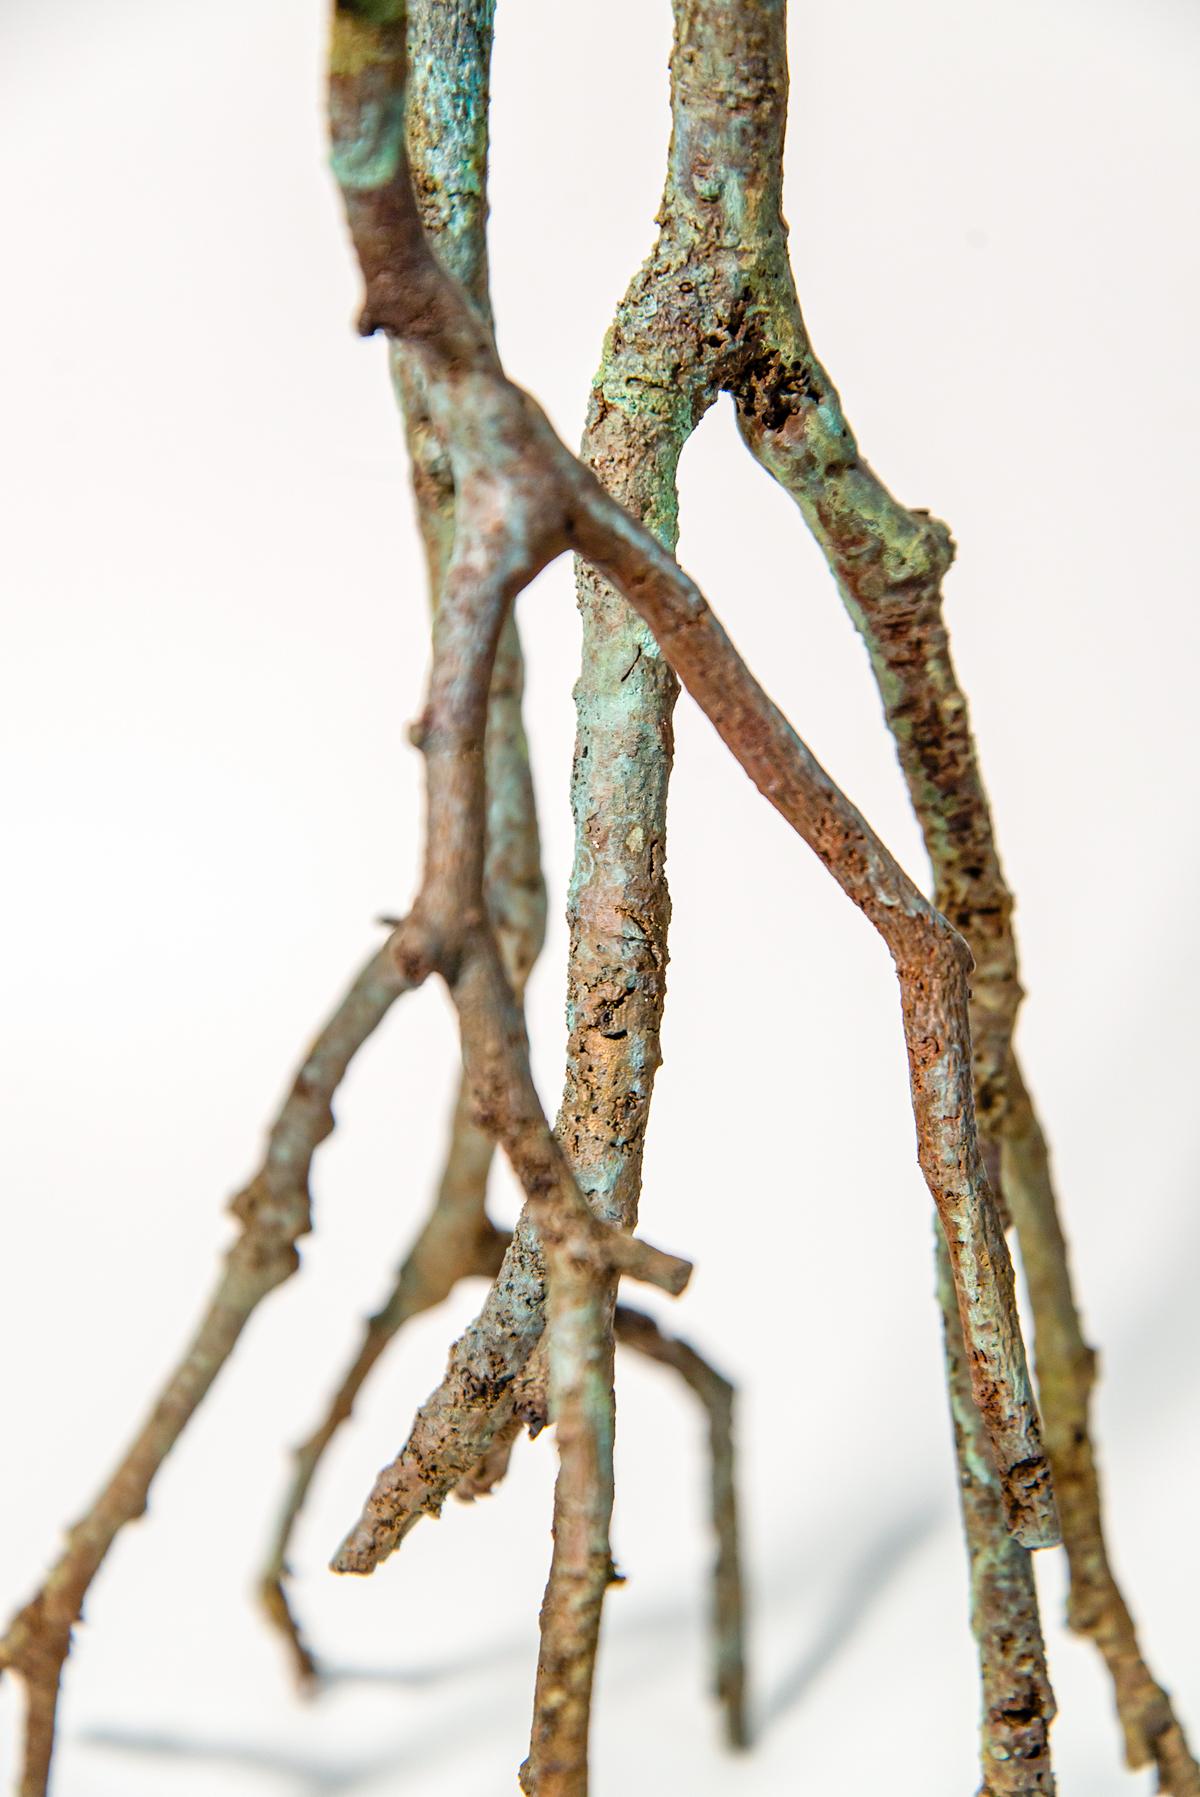 The evocative image of tree branches lying on the ground caught the imagination of sculptor Roch Smith. The Toronto artist re-envisioned the natural form as arms and limbs in a playful series of sculptures called The Treemen. Dreamwalker is rendered